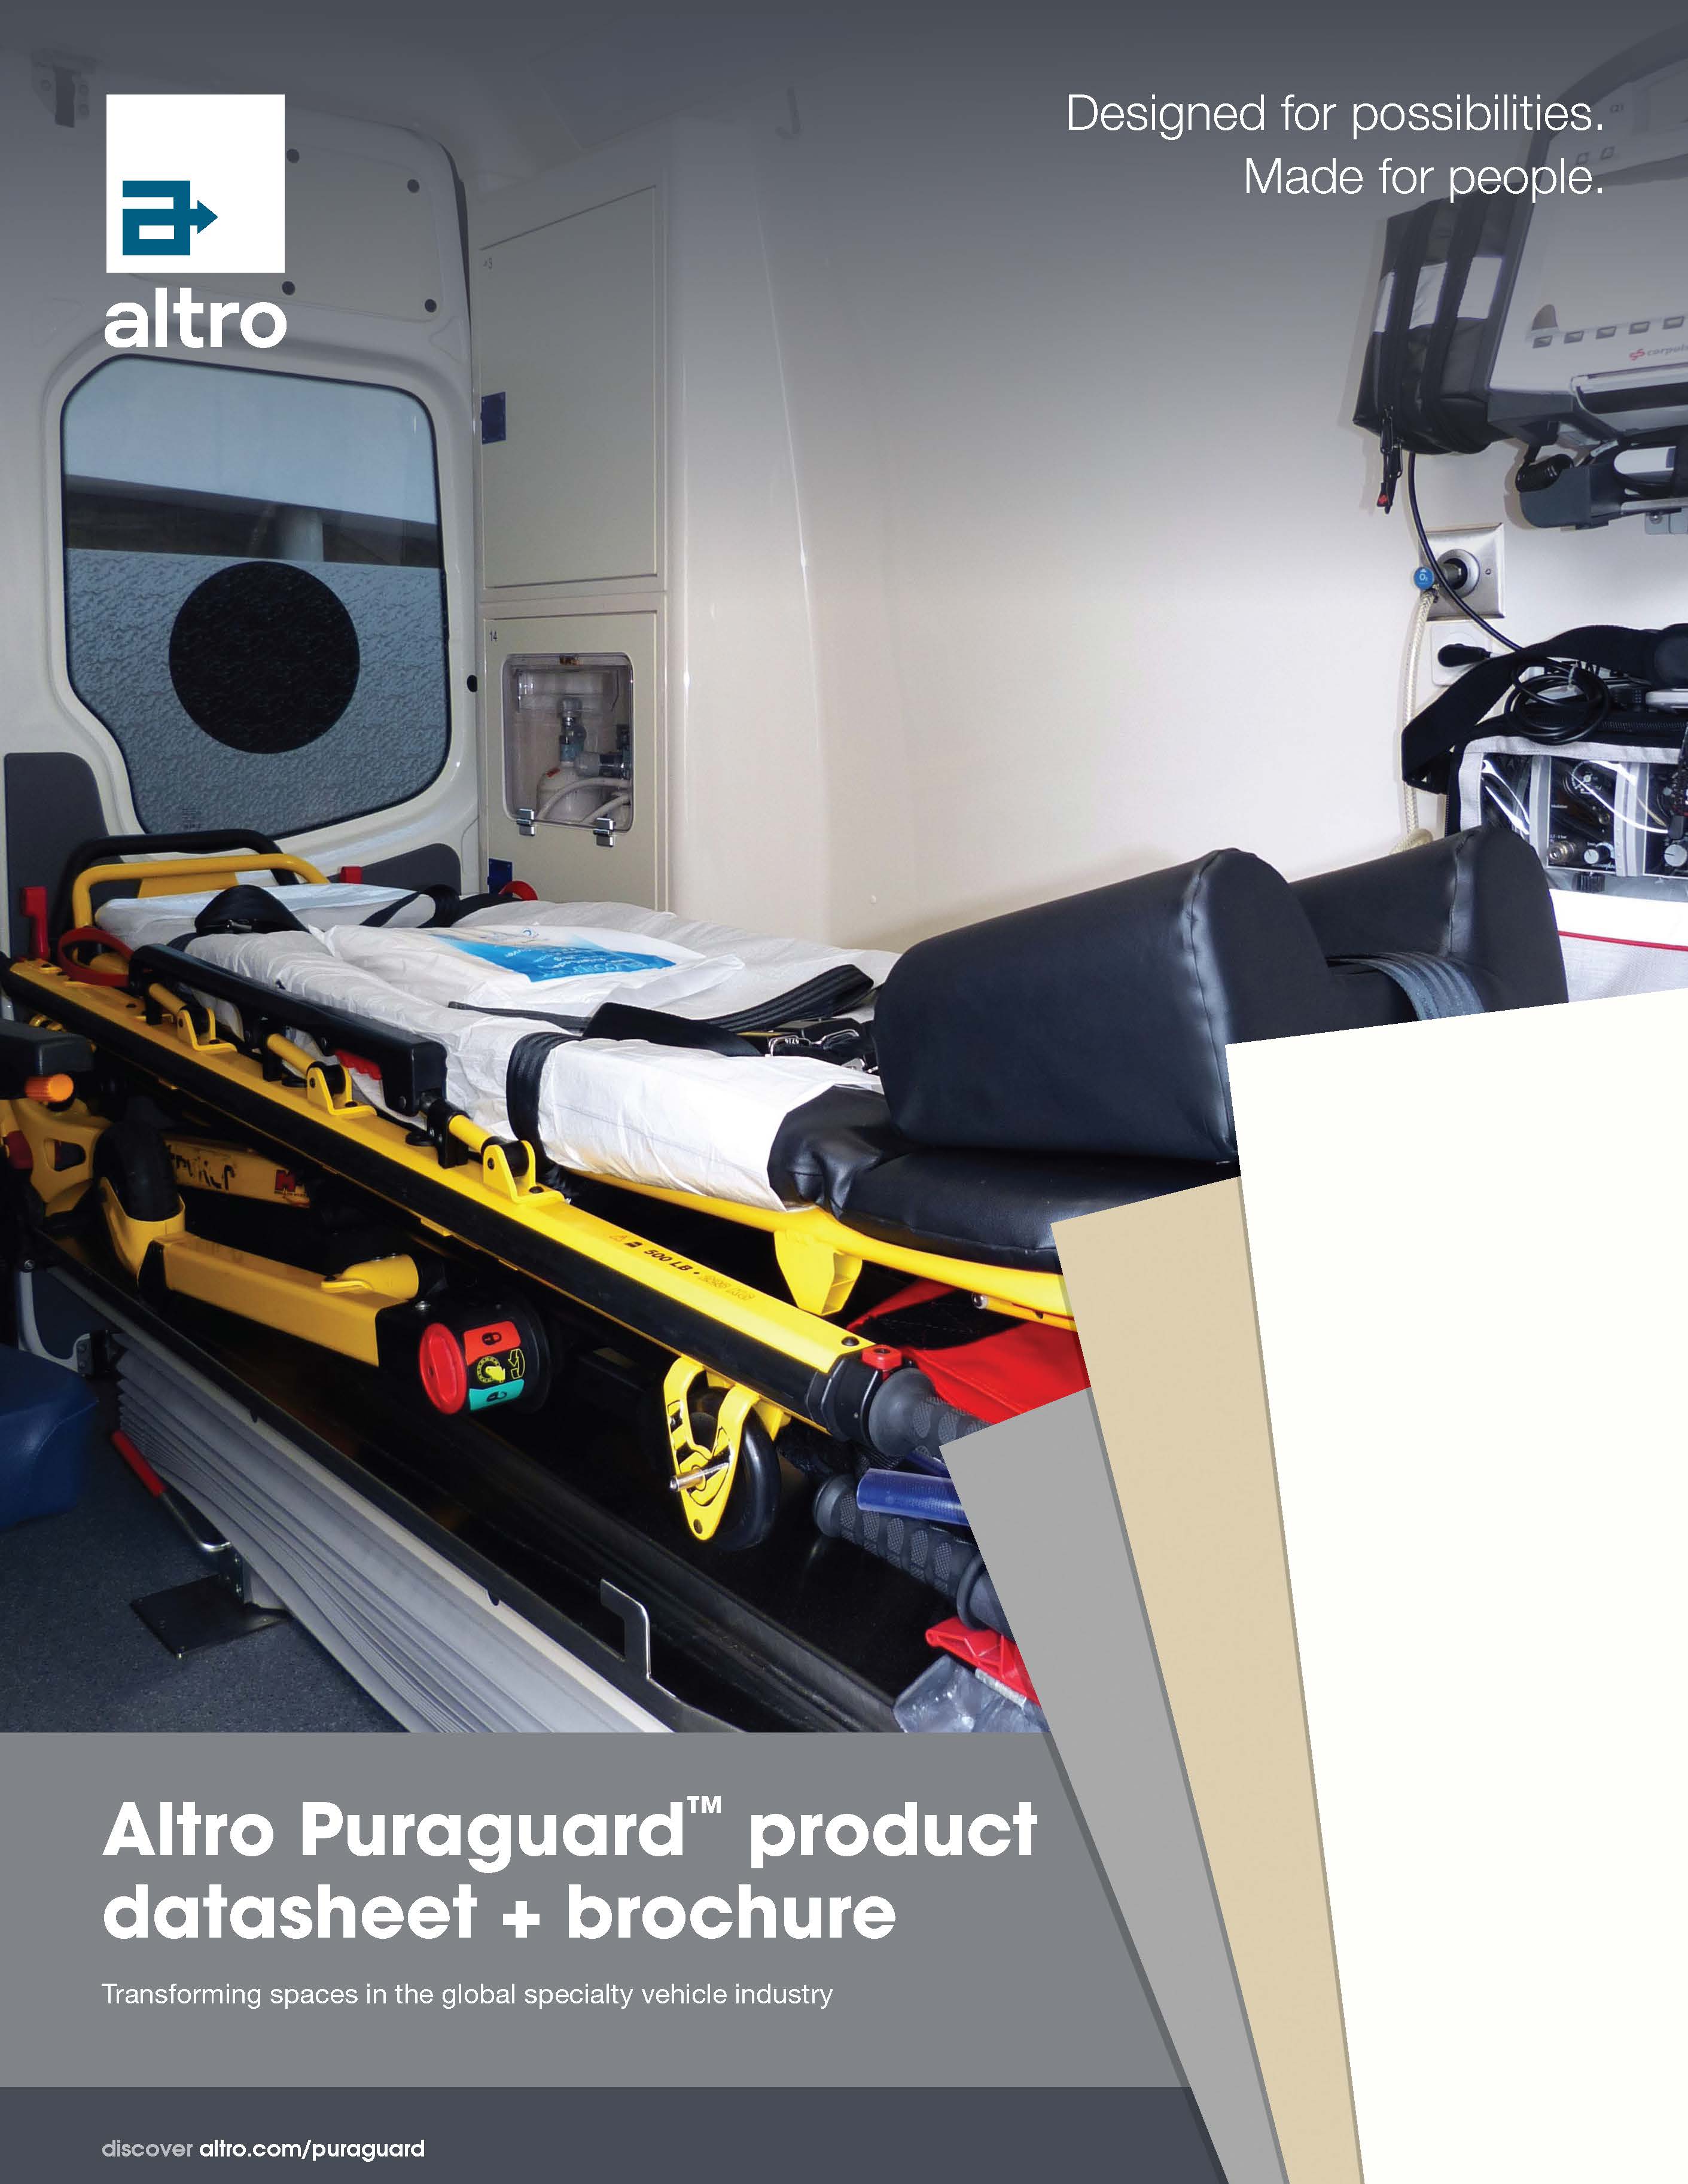 Altro Transfor Puraguard walls for emergency vehicles